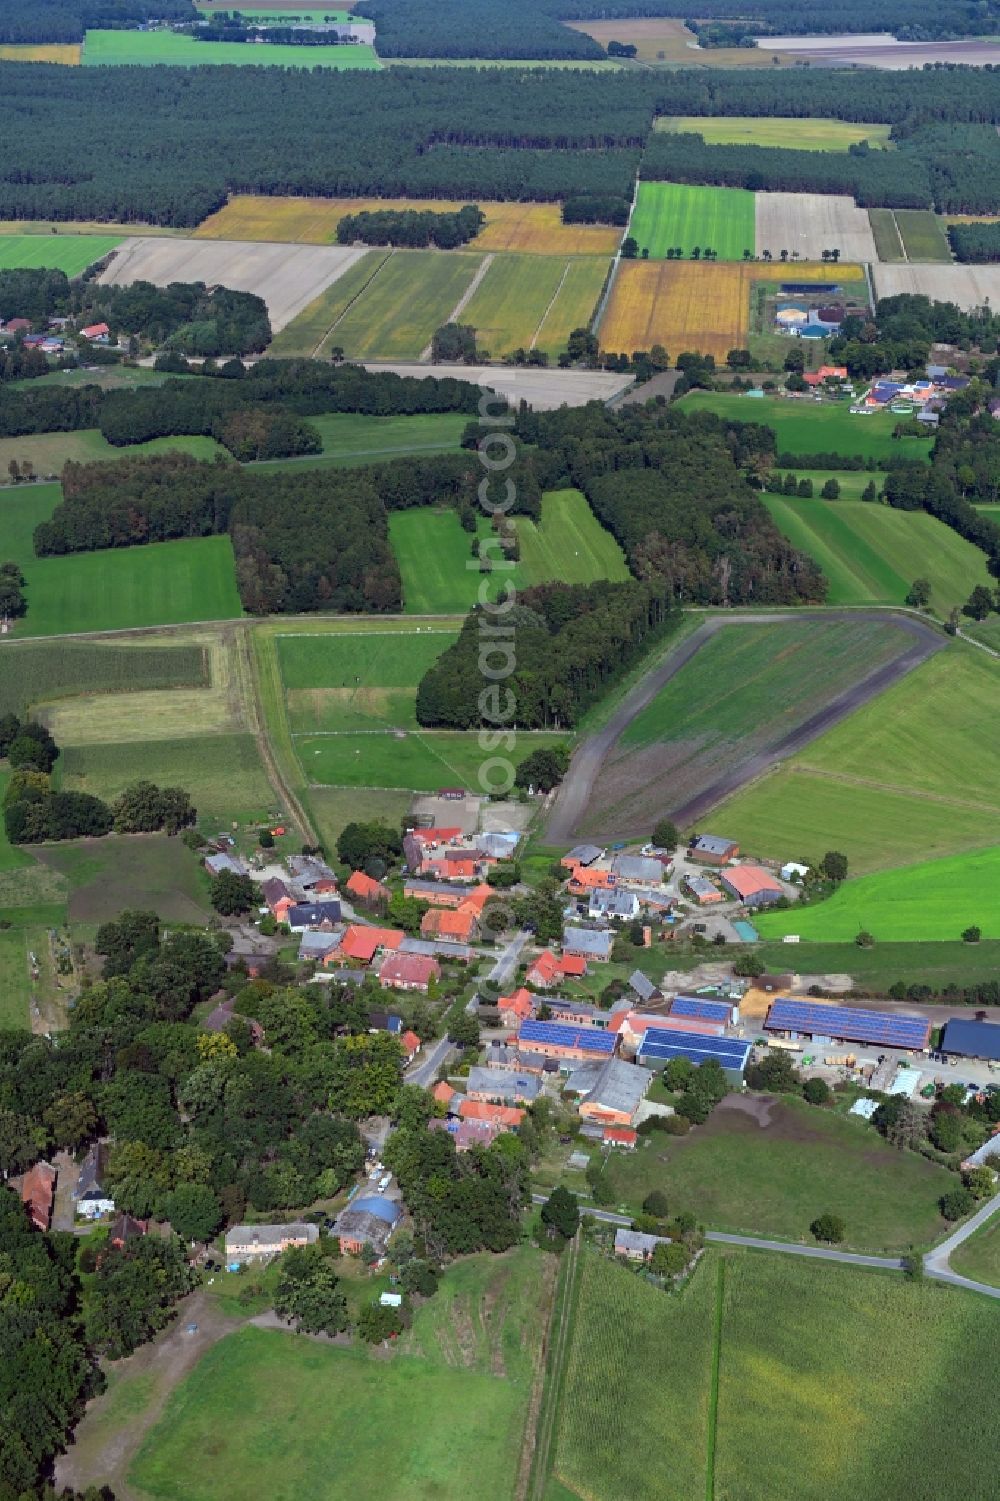 Teichlosen from the bird's eye view: Village - view on the edge of agricultural fields and farmland in Teichlosen in the state Lower Saxony, Germany